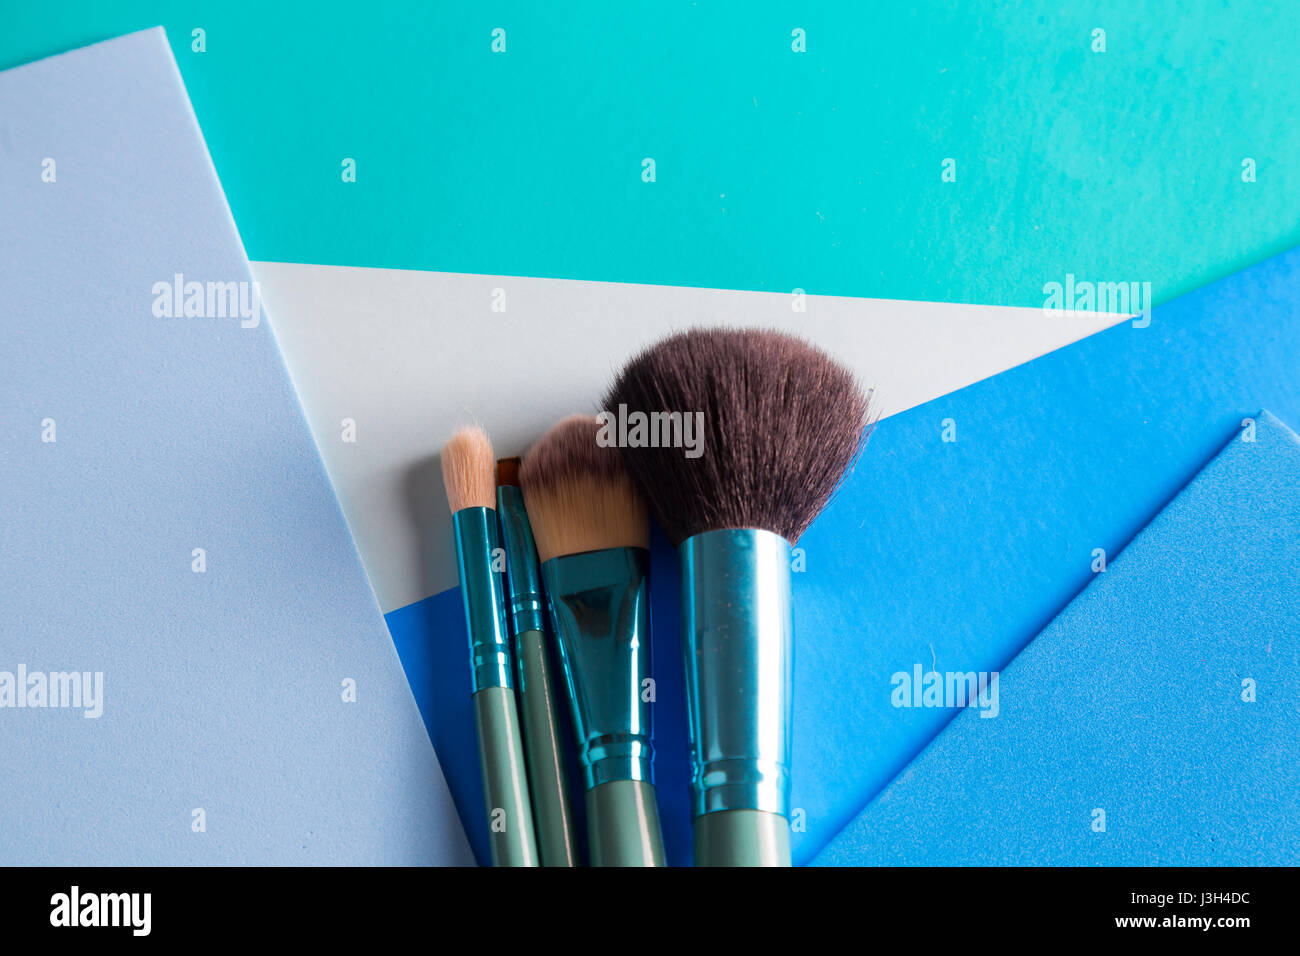 Her Life in Shades of Blue: Still Life of a make-up brush placed on a multi-tone shades of blue. Stock Photo